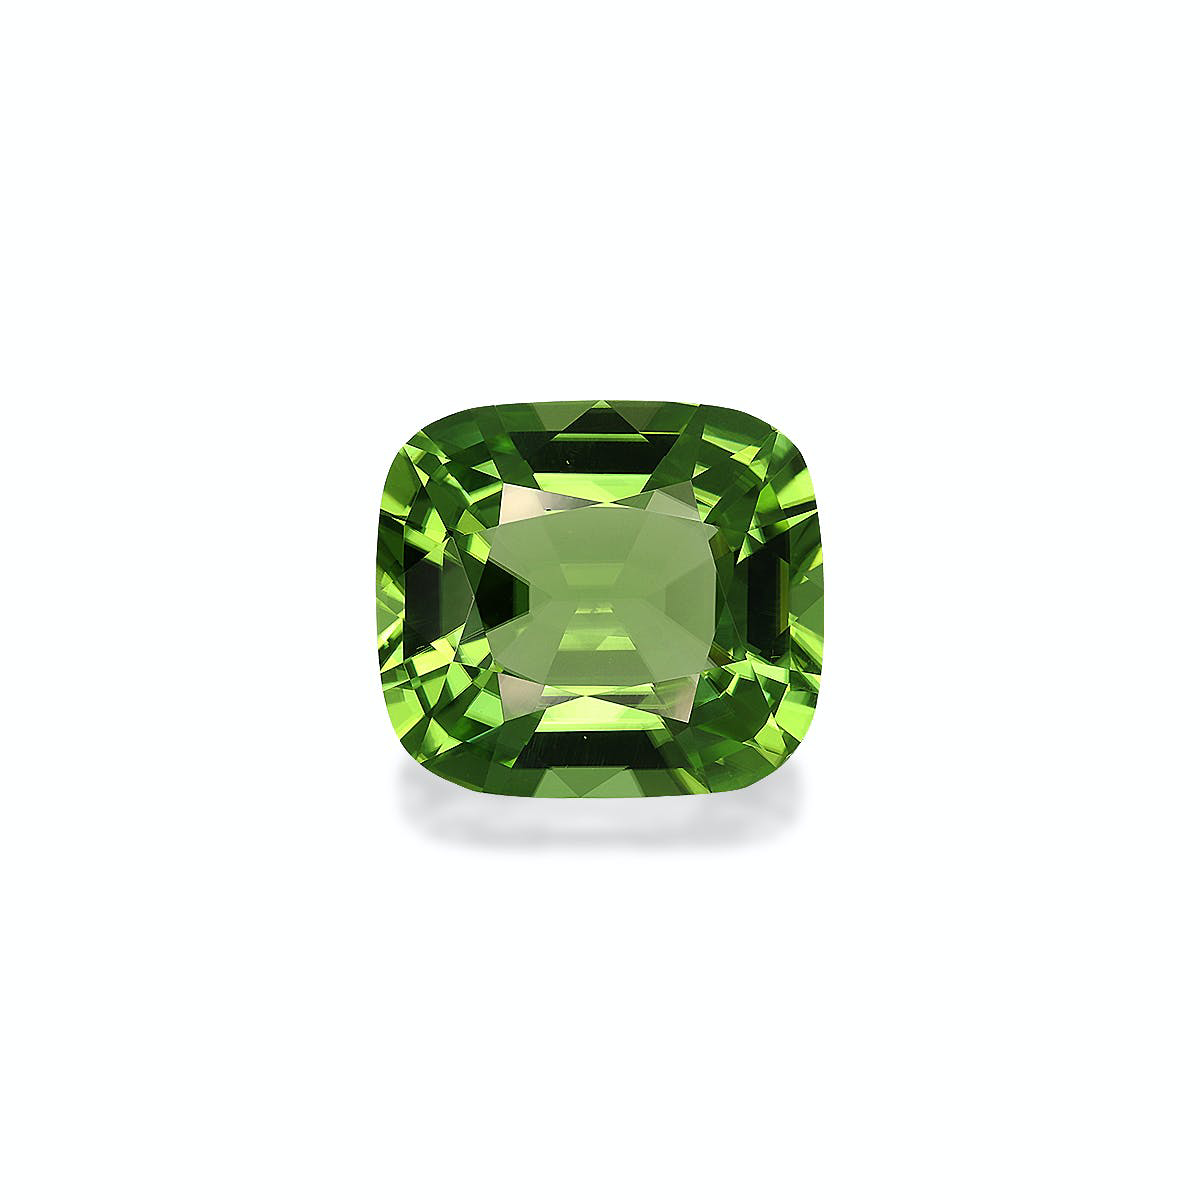 Picture of Vivid Green Peridot 20.82ct - 18x16mm (PD0334)